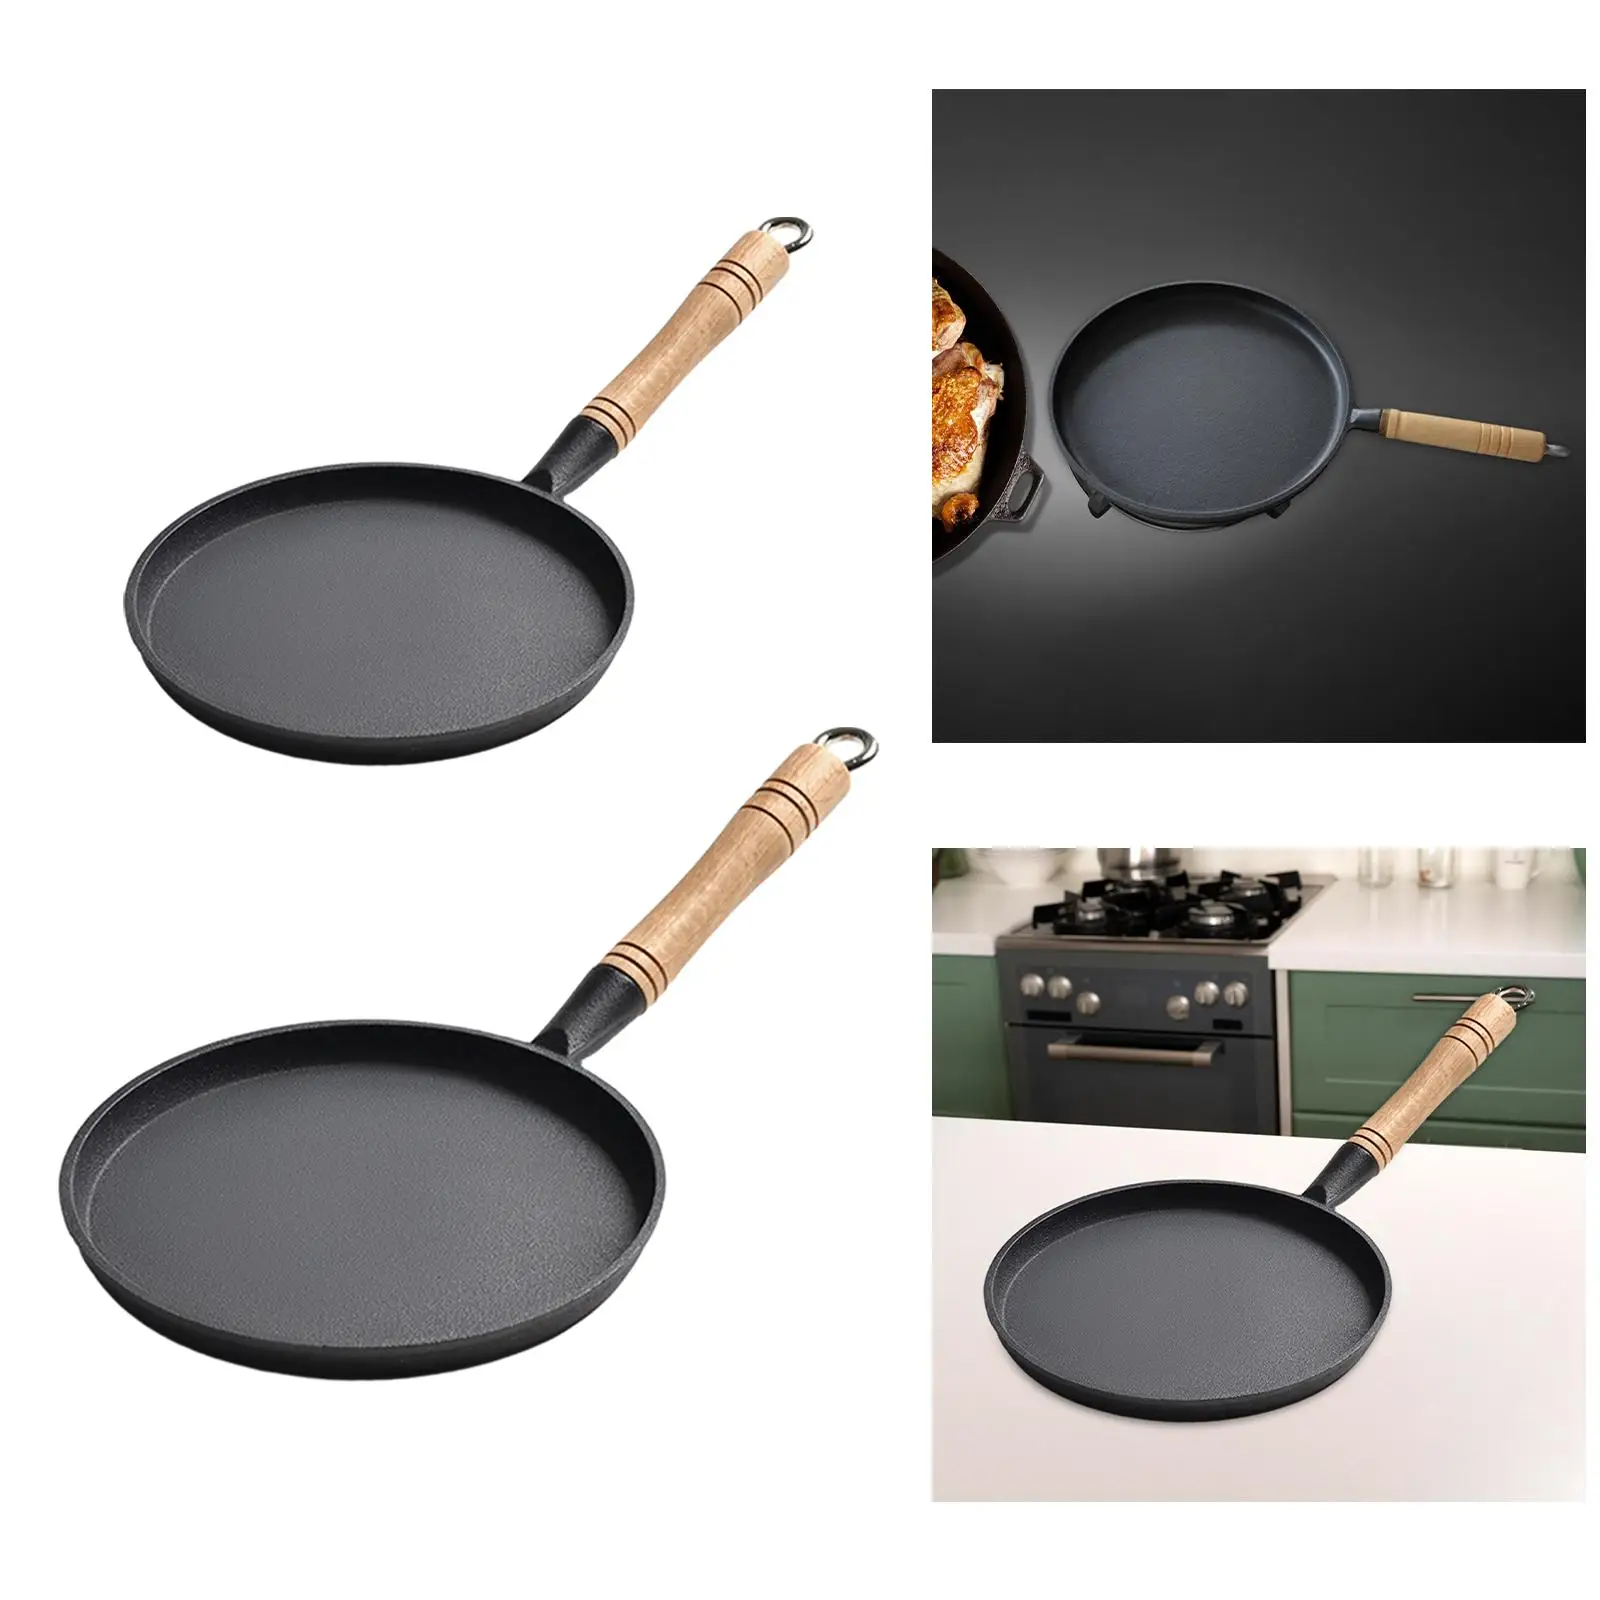 Heavy Gauge Crepe Pancake Pan Nonstick Frying Pan with Wooden Handle Cooking Omelette Pan for Kitchen Picnic Camping BBQ Outdoor